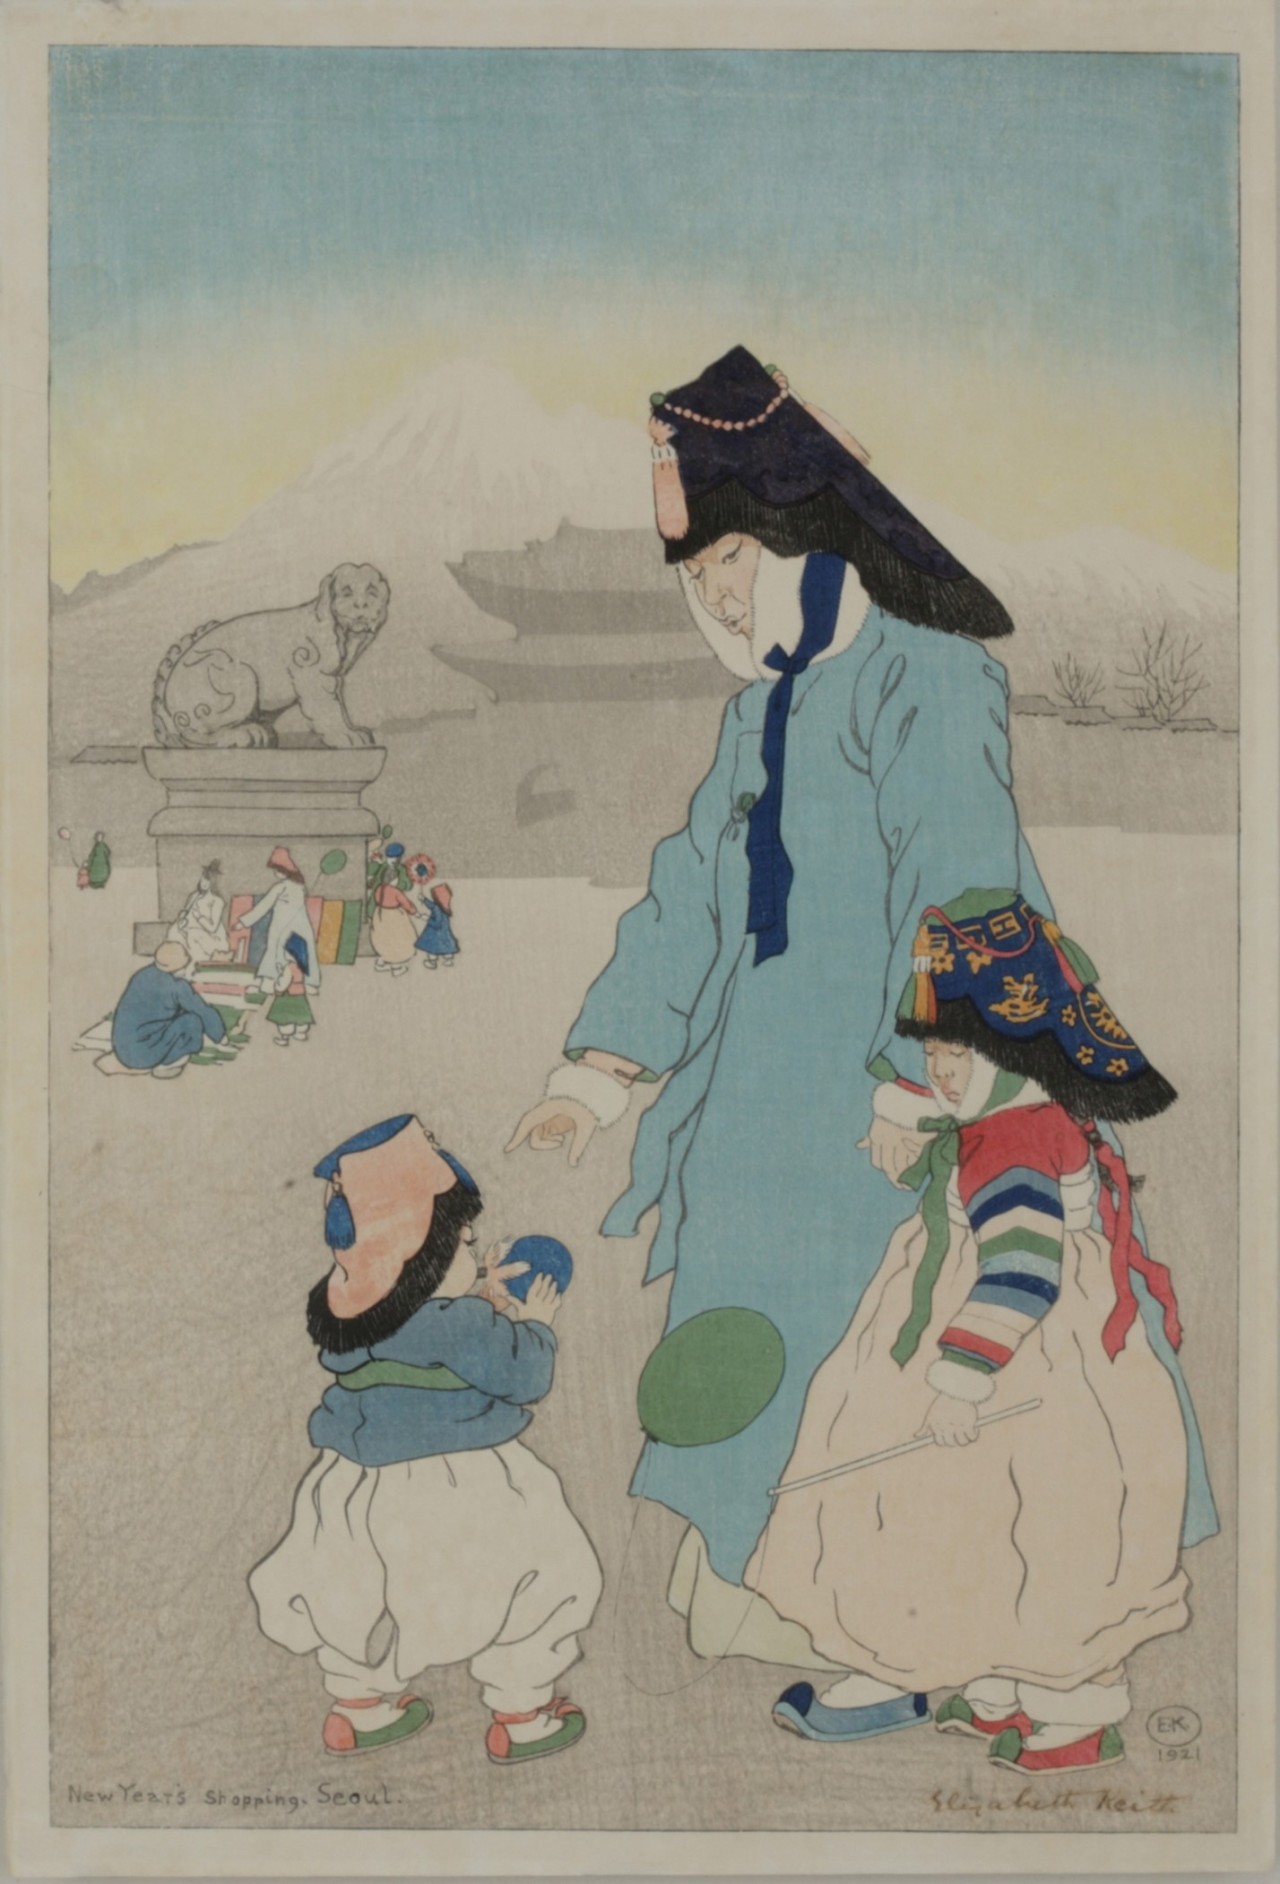 Korean mother and children dressed in colorful hanbok for a holiday, a work by Elizabeth Keith, Scottish artist and writer, in 1919. (National Folk Museum of Korea)